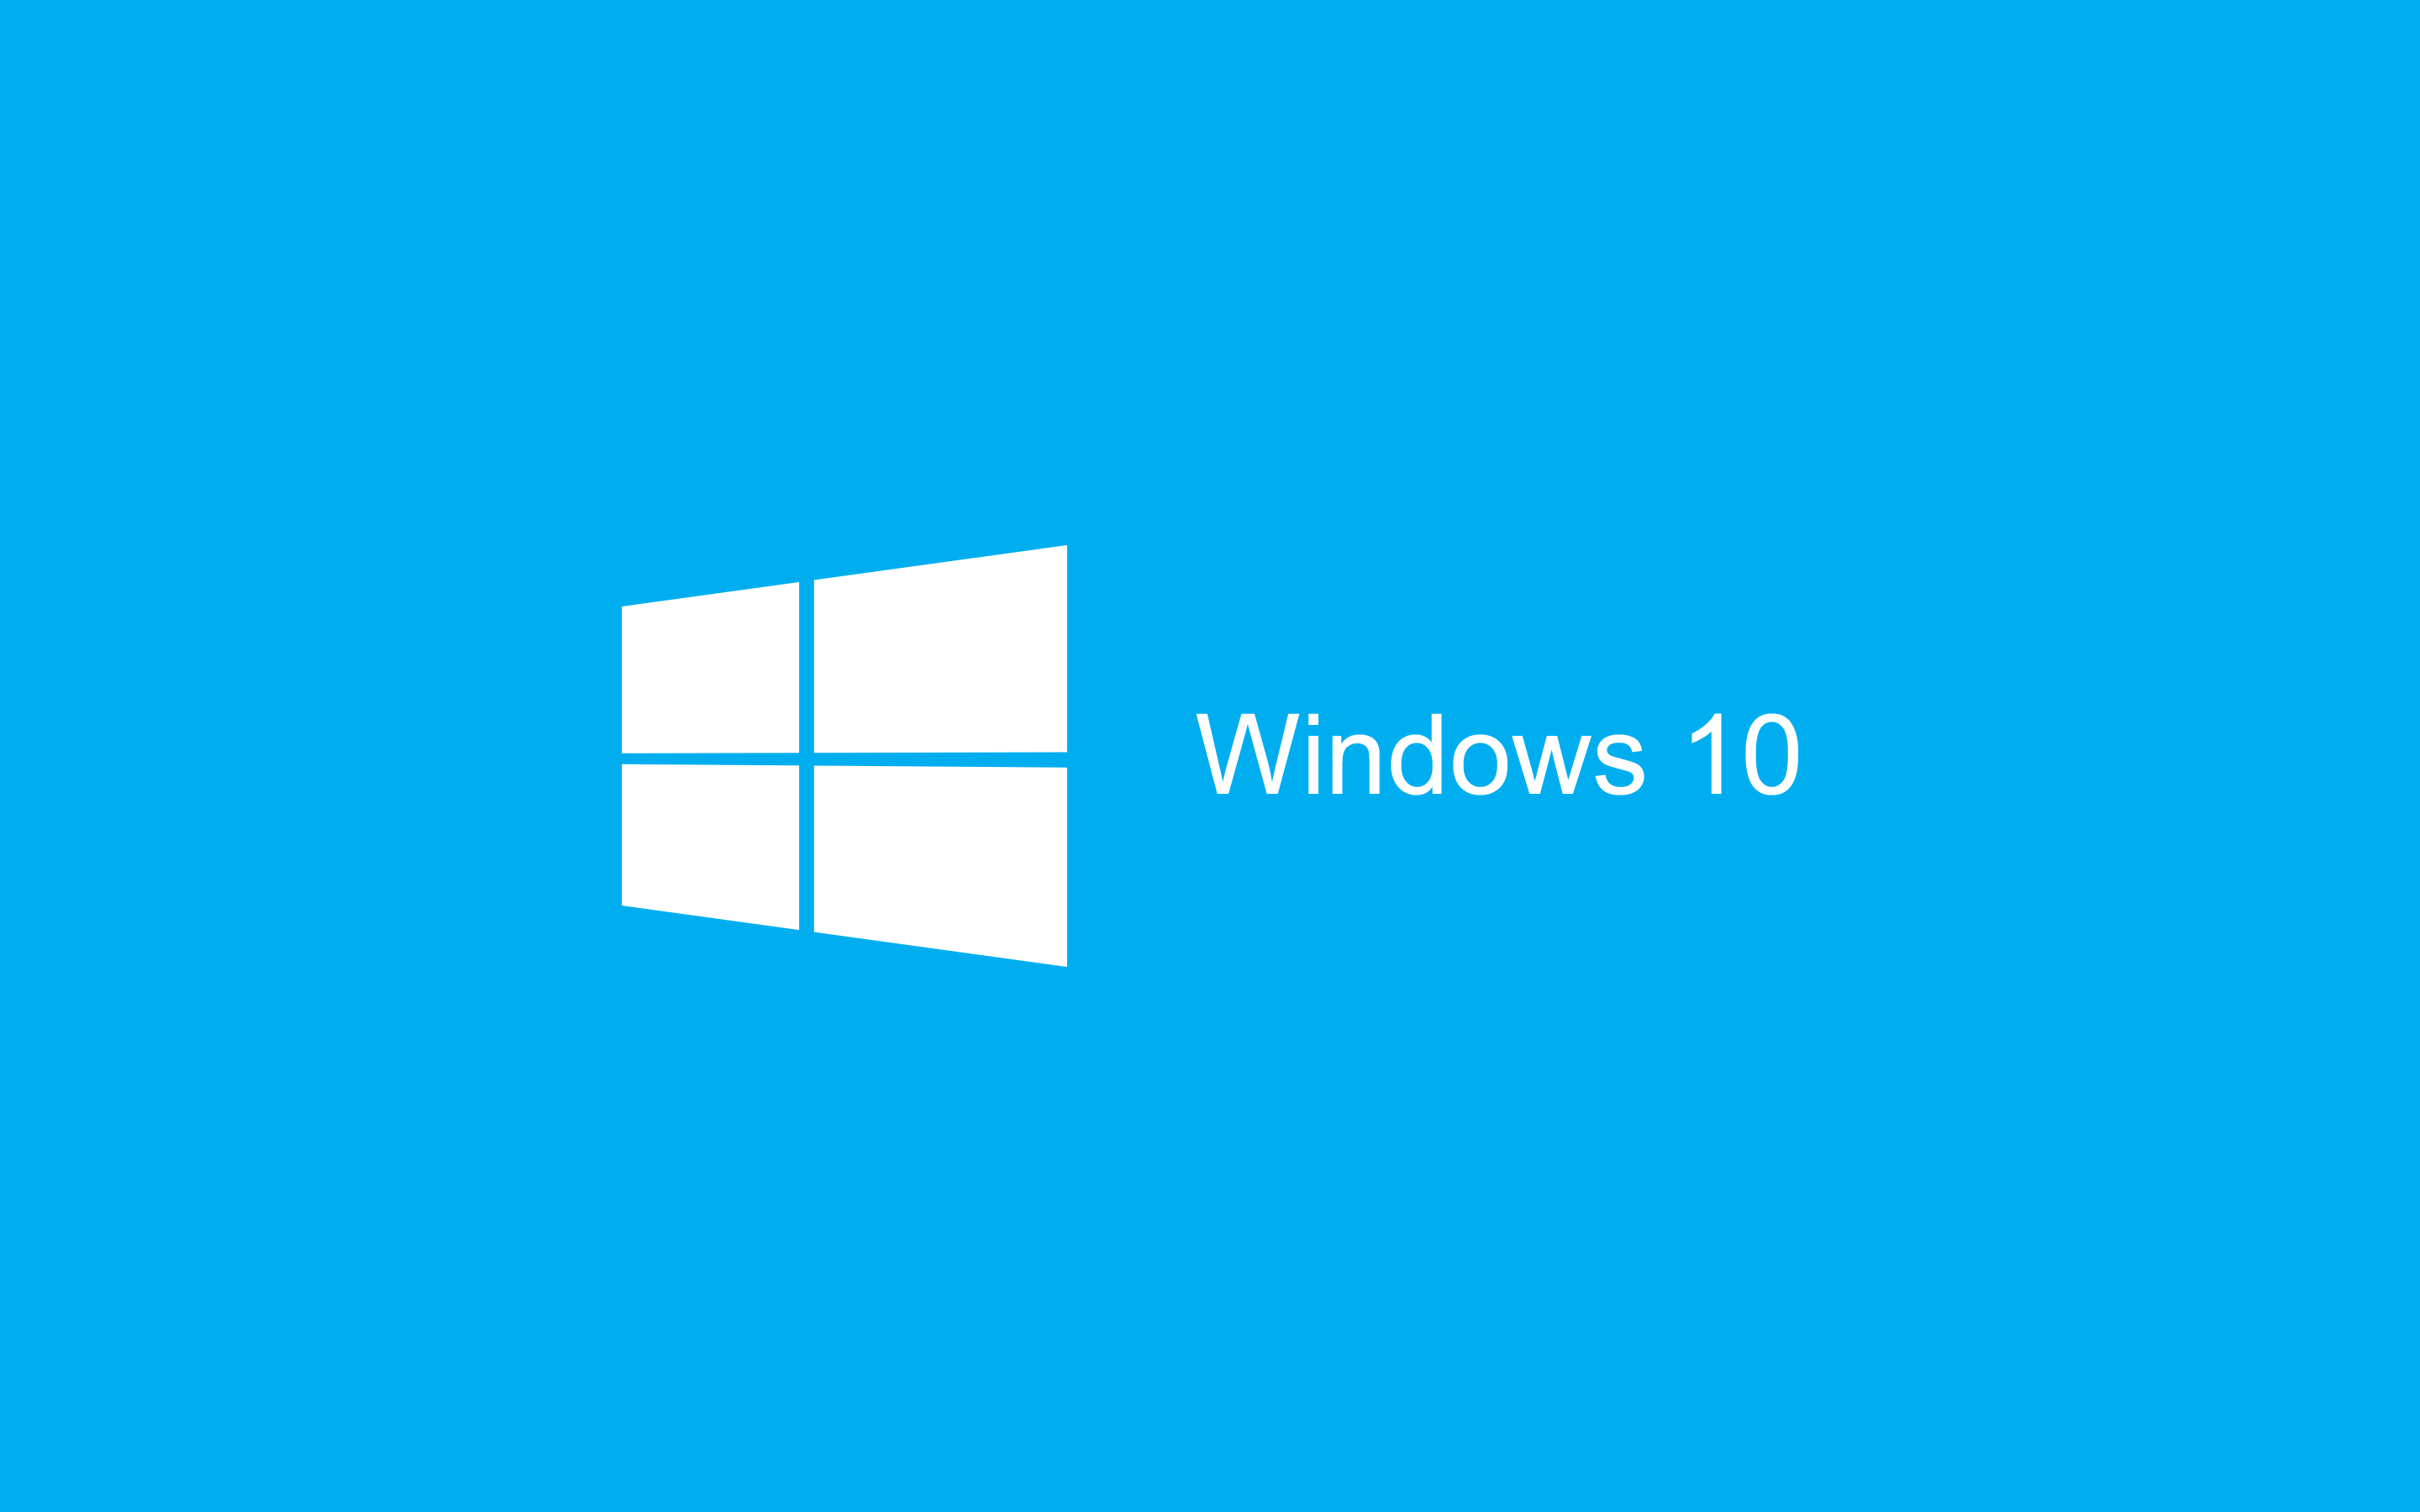 Its official Windows 10 can run Android apps sort of